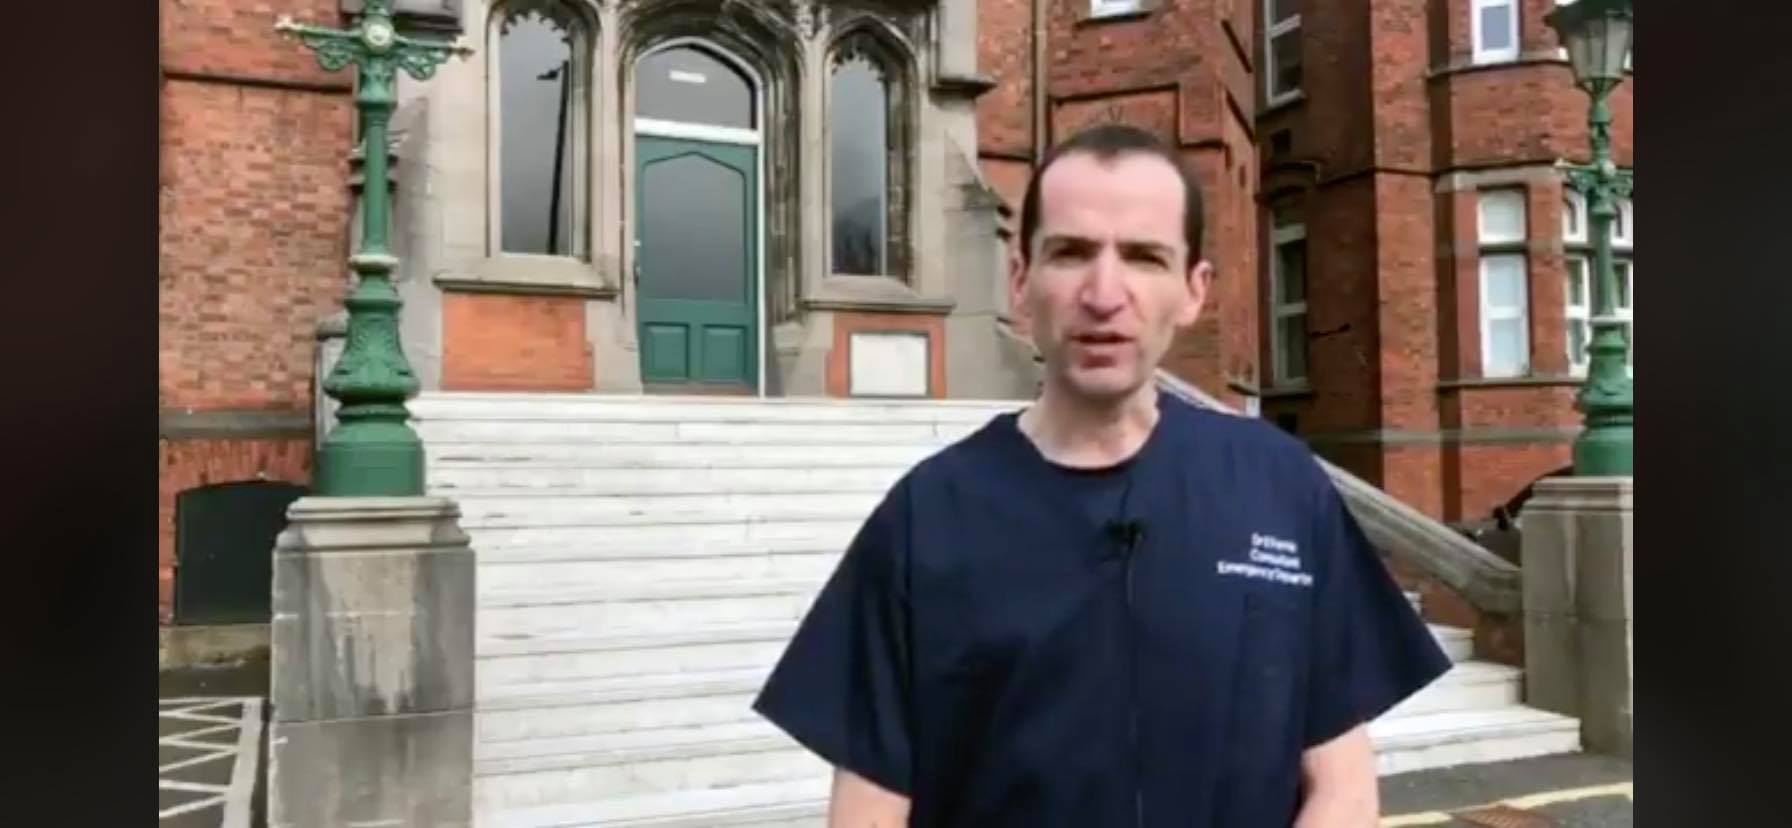 Dr Eoghan Ferrie, Emergency Department Consultant at the Mater, says staff are ready for the surge